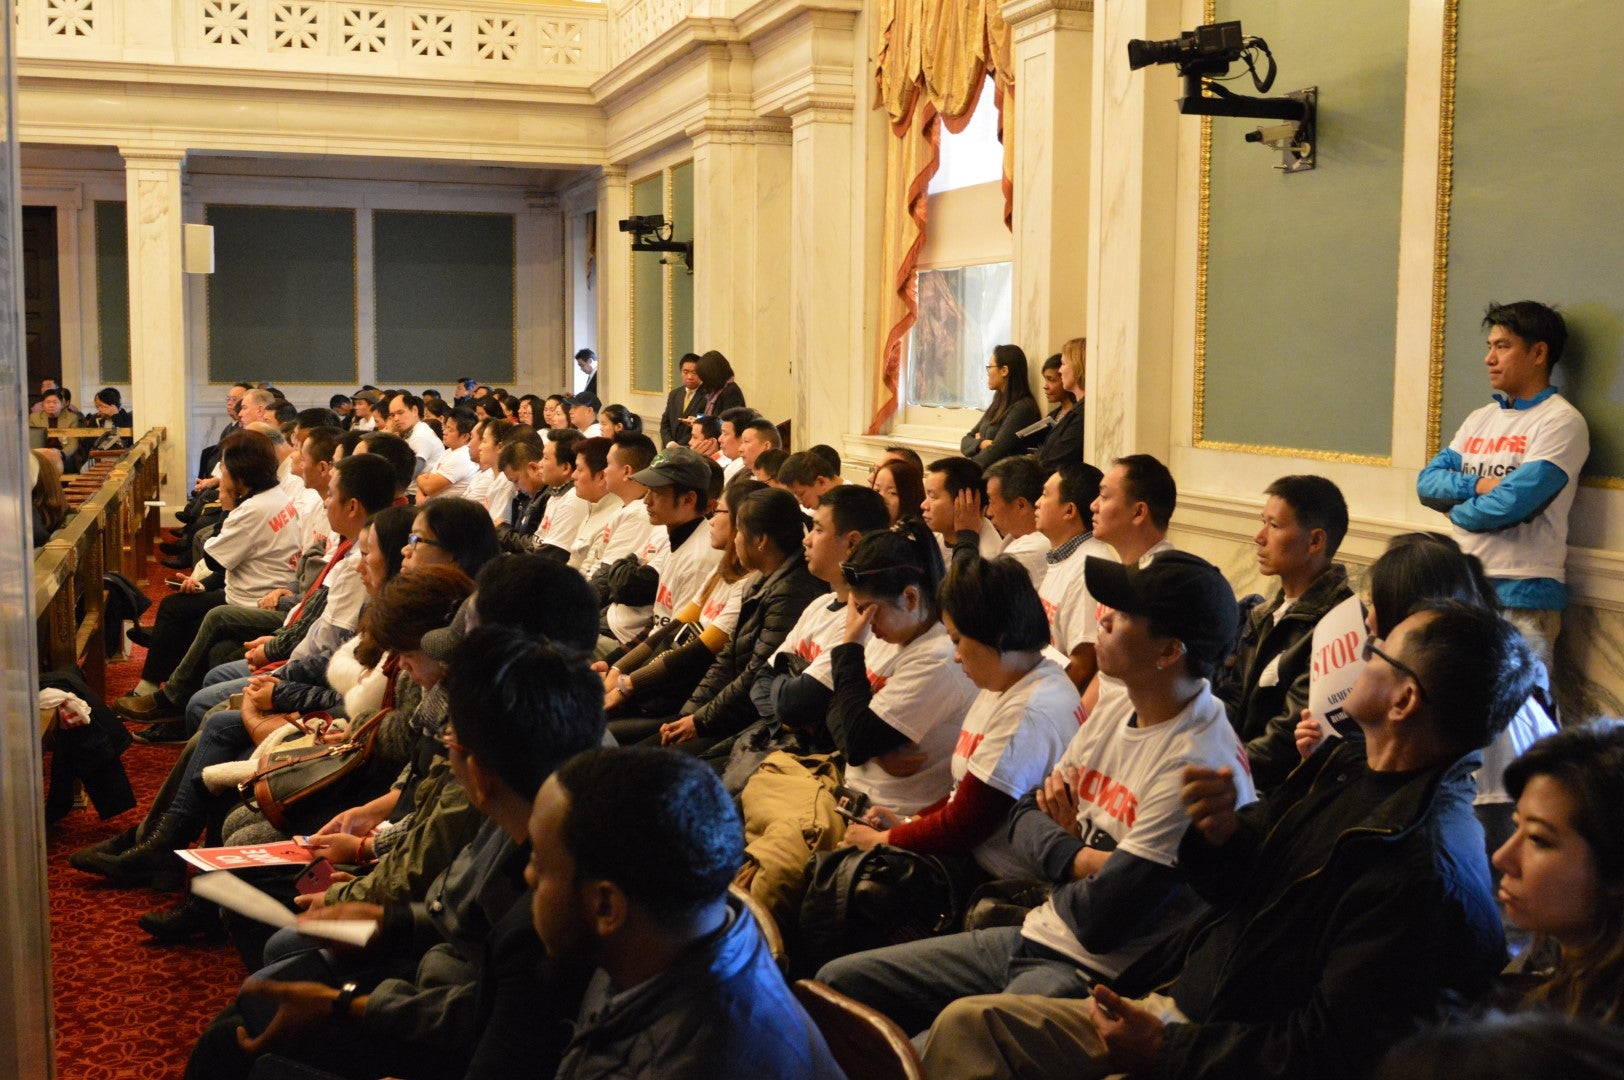 Members of Philadelphia's Asian community attended a hearing on home invasion robberies. (Tom MacDonald/WHYY)